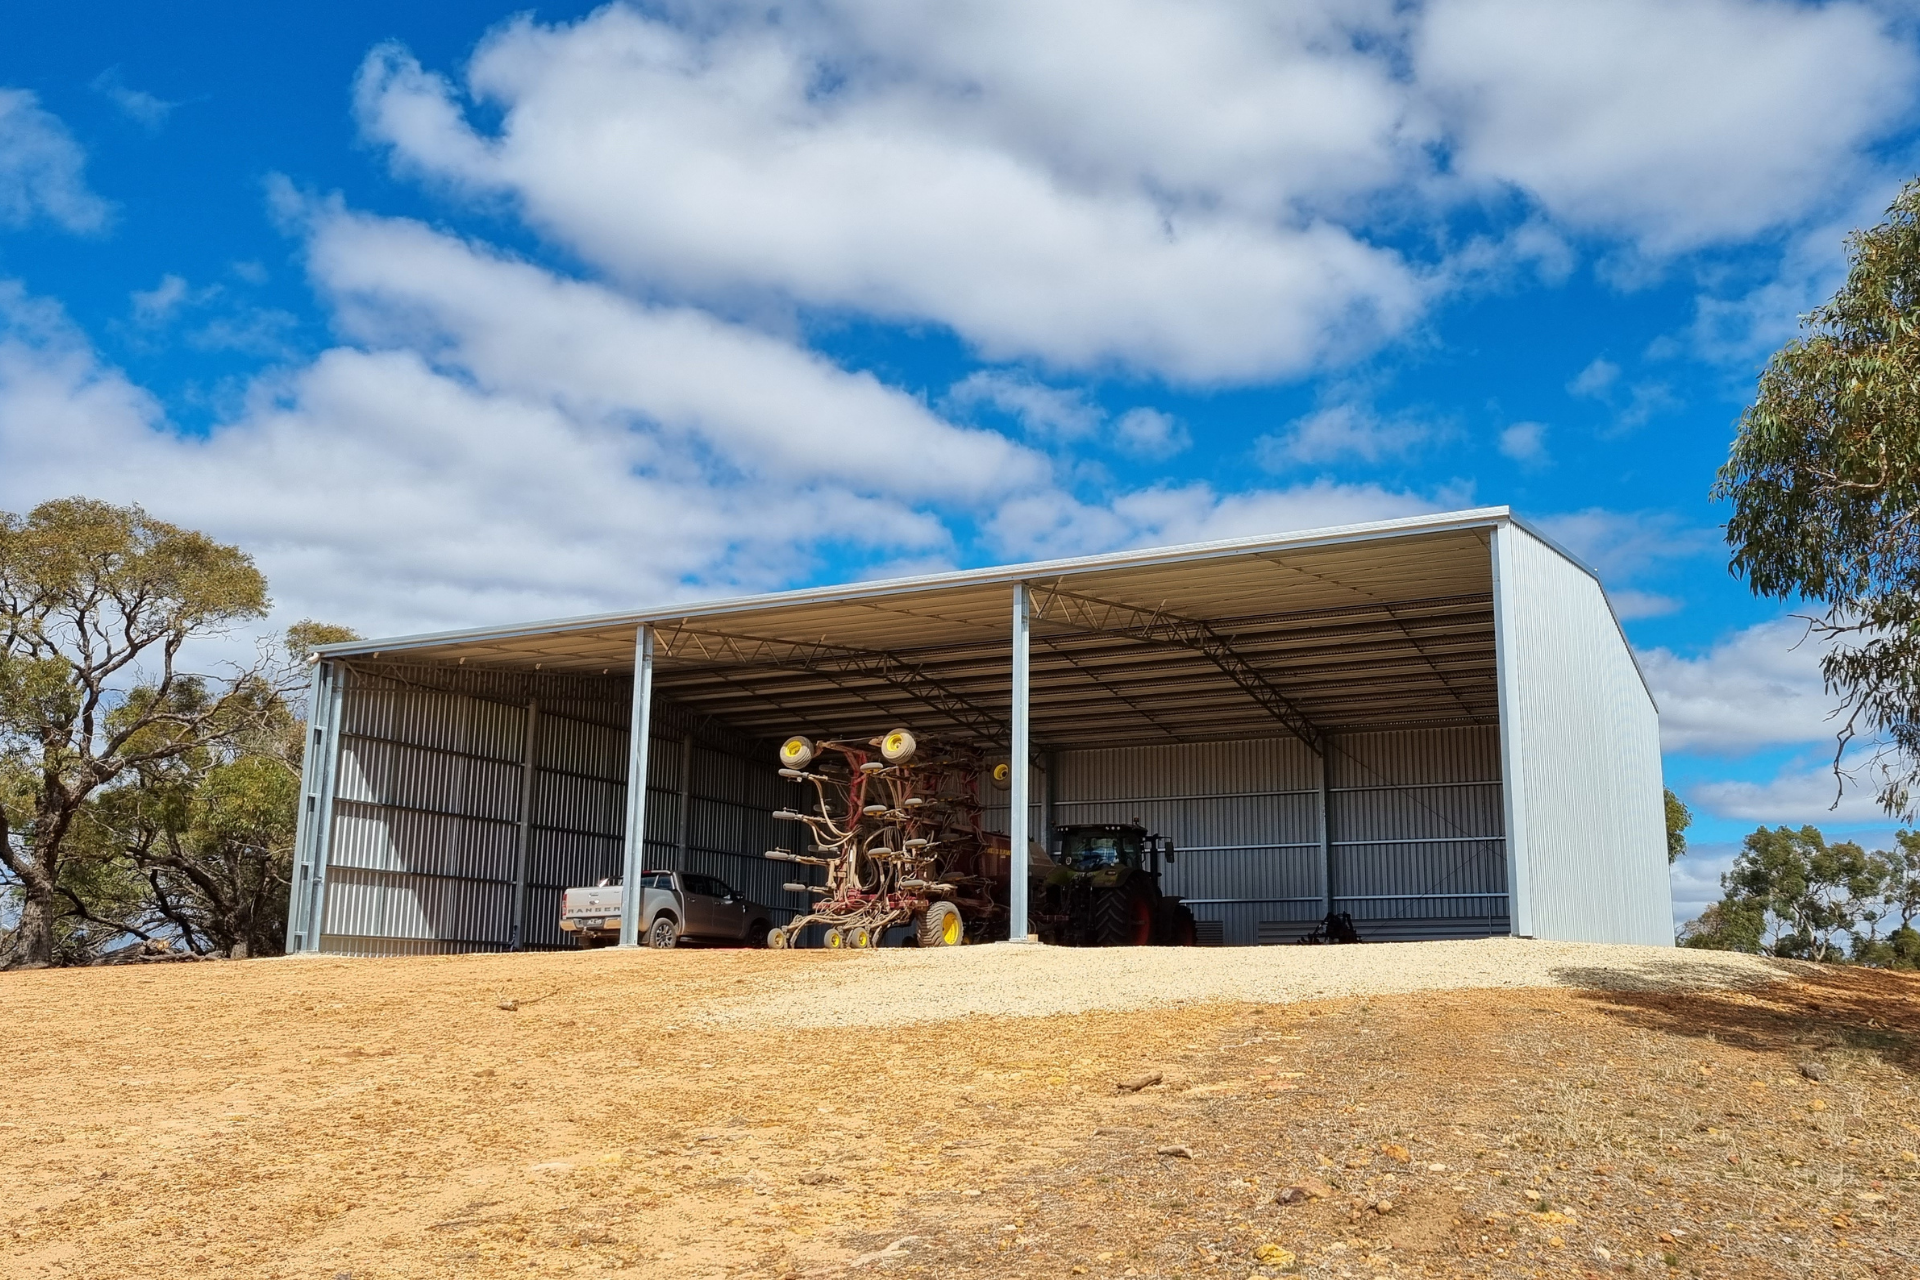 A 24m x 18m x 6m machinery shed at Great Western VIC